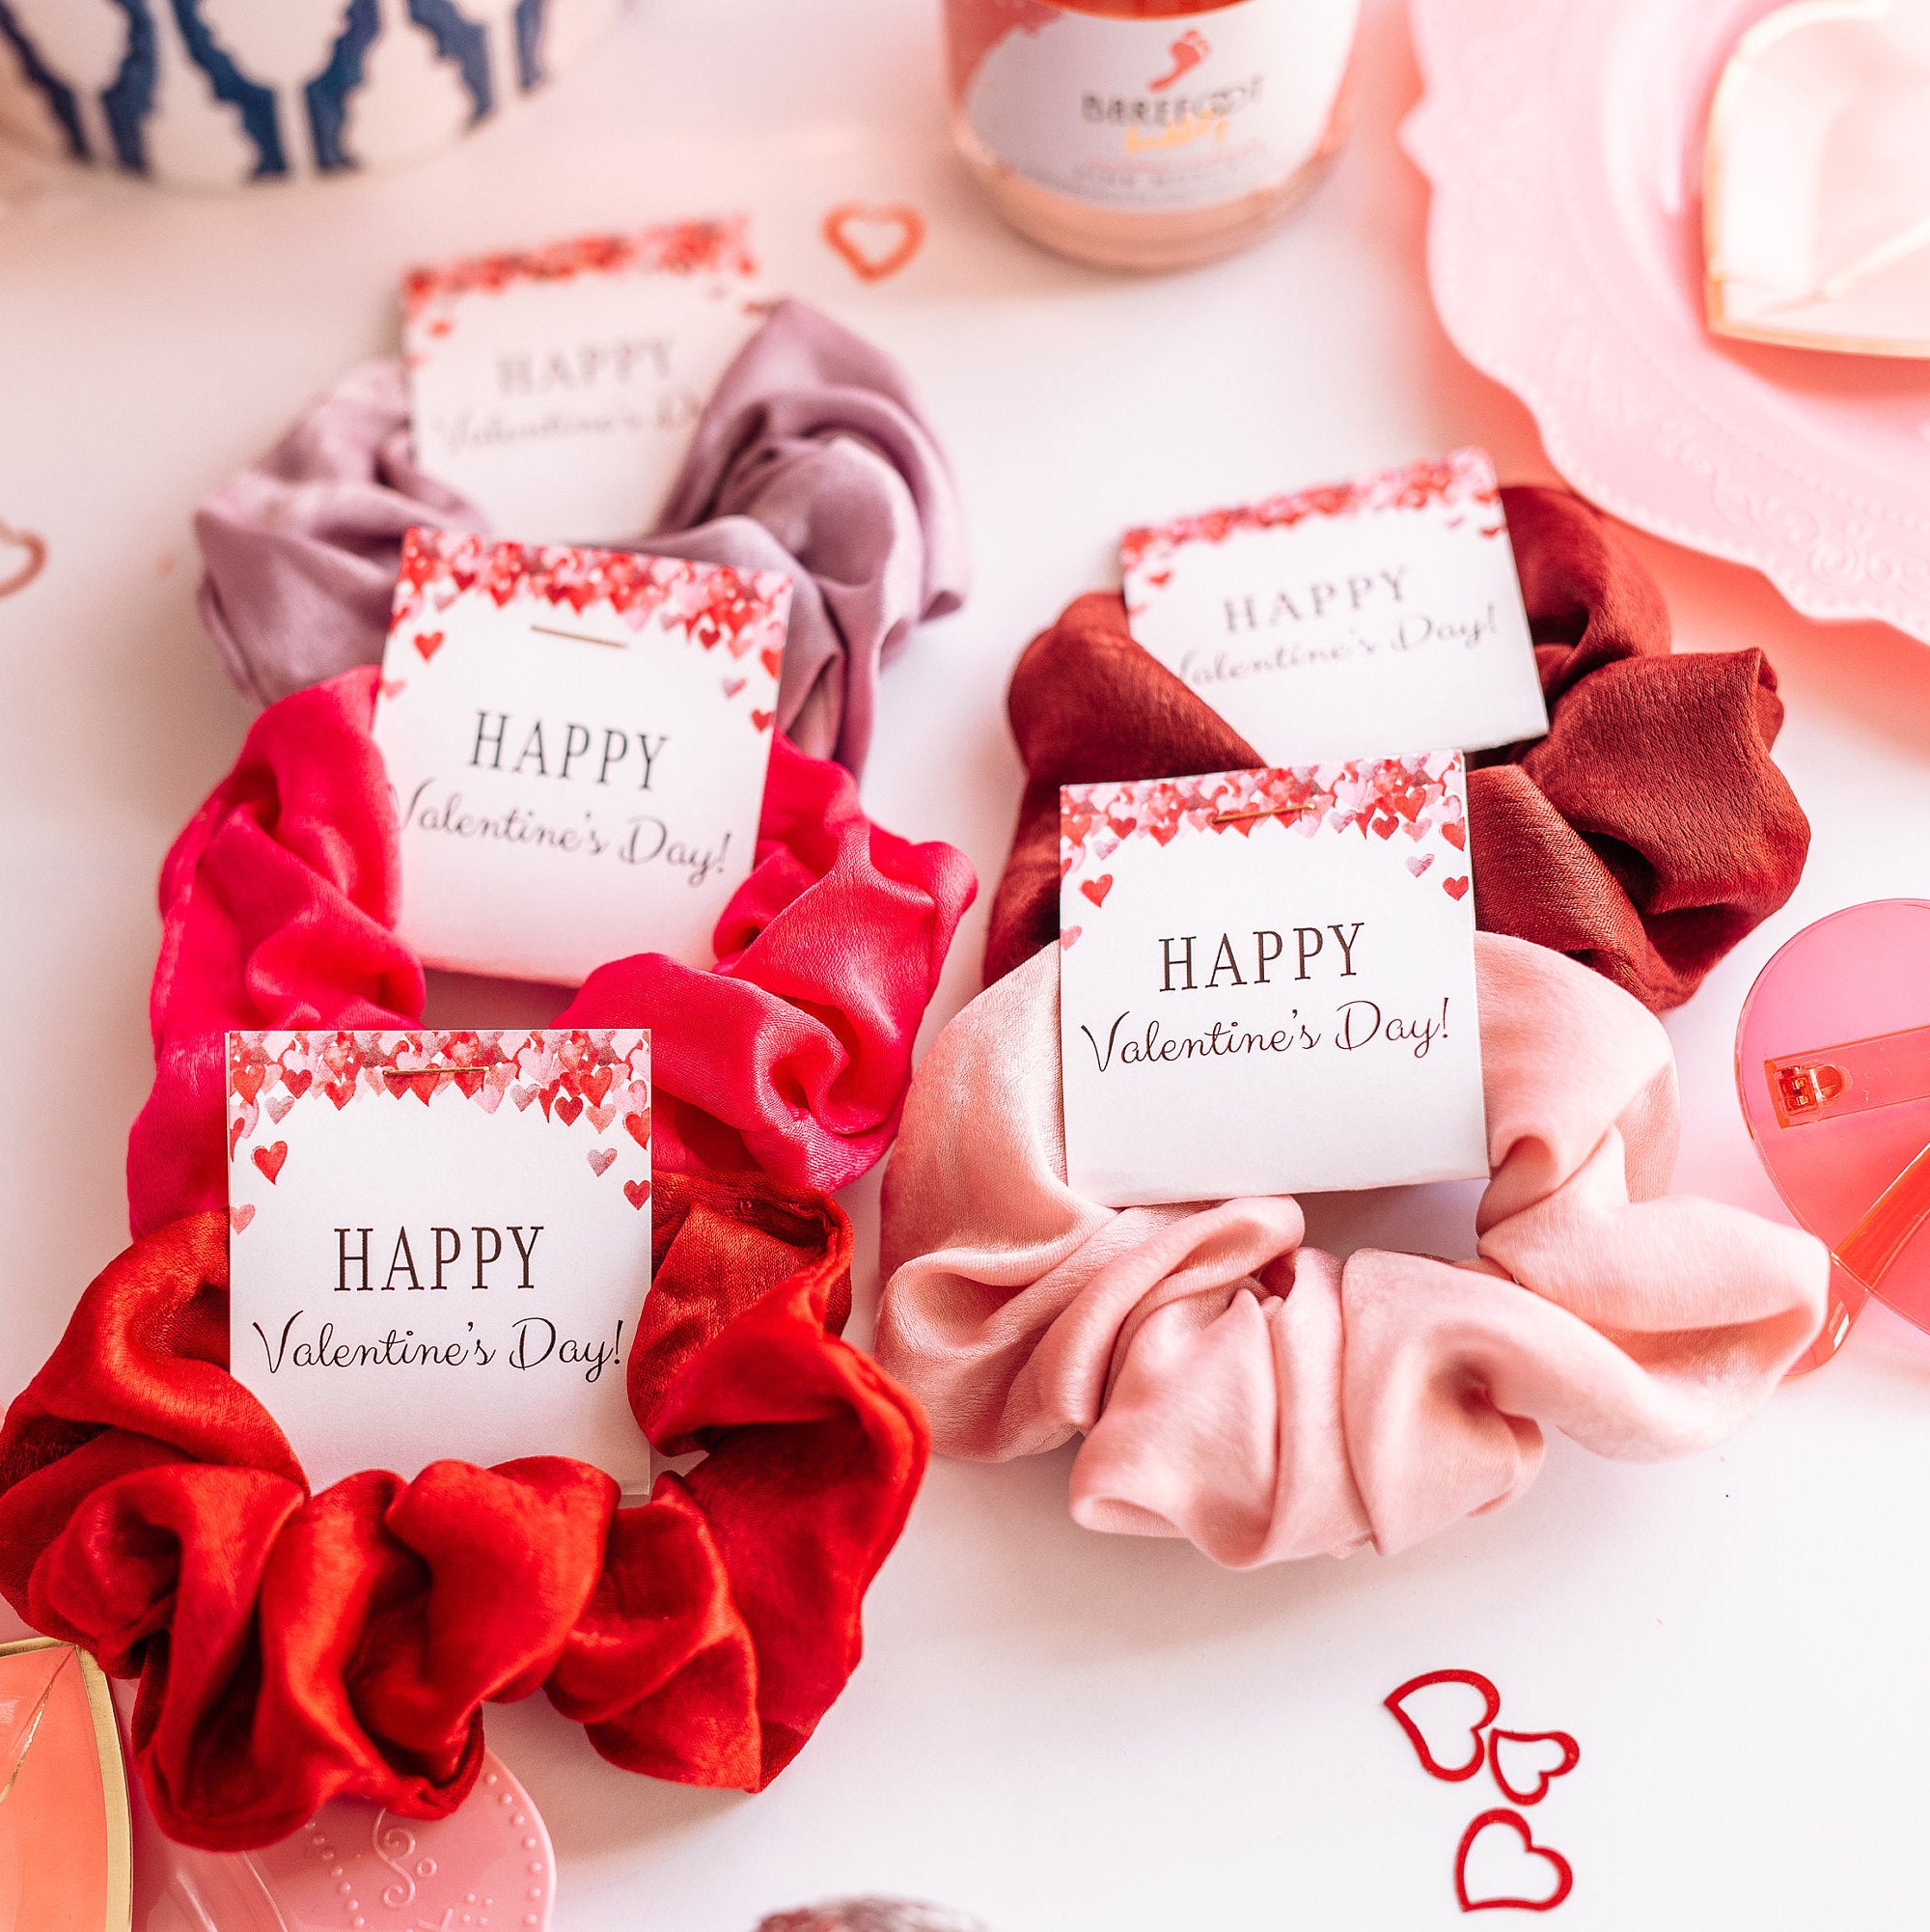 Happy Valentine's Day Party Favors, Gift for Friend, Teacher Gift